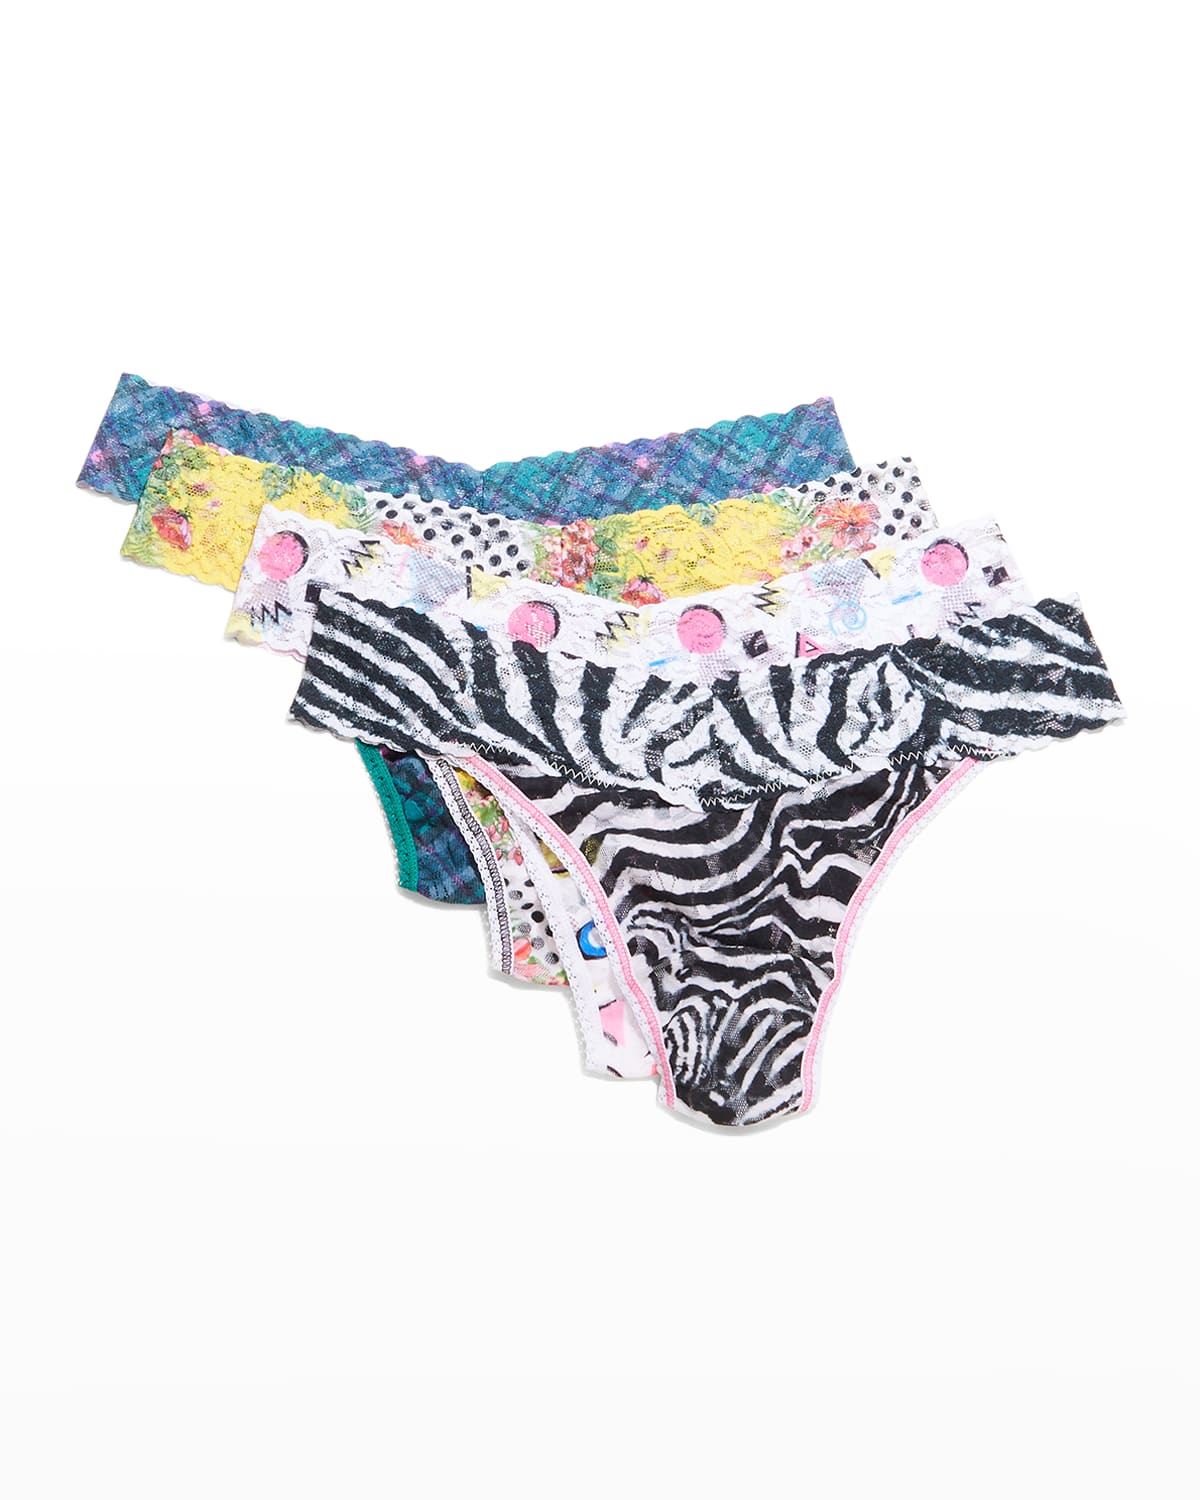 Soy Luna Pack 3 Slips Underwear Kid Girl Cotton Model/Color Can Vary NM